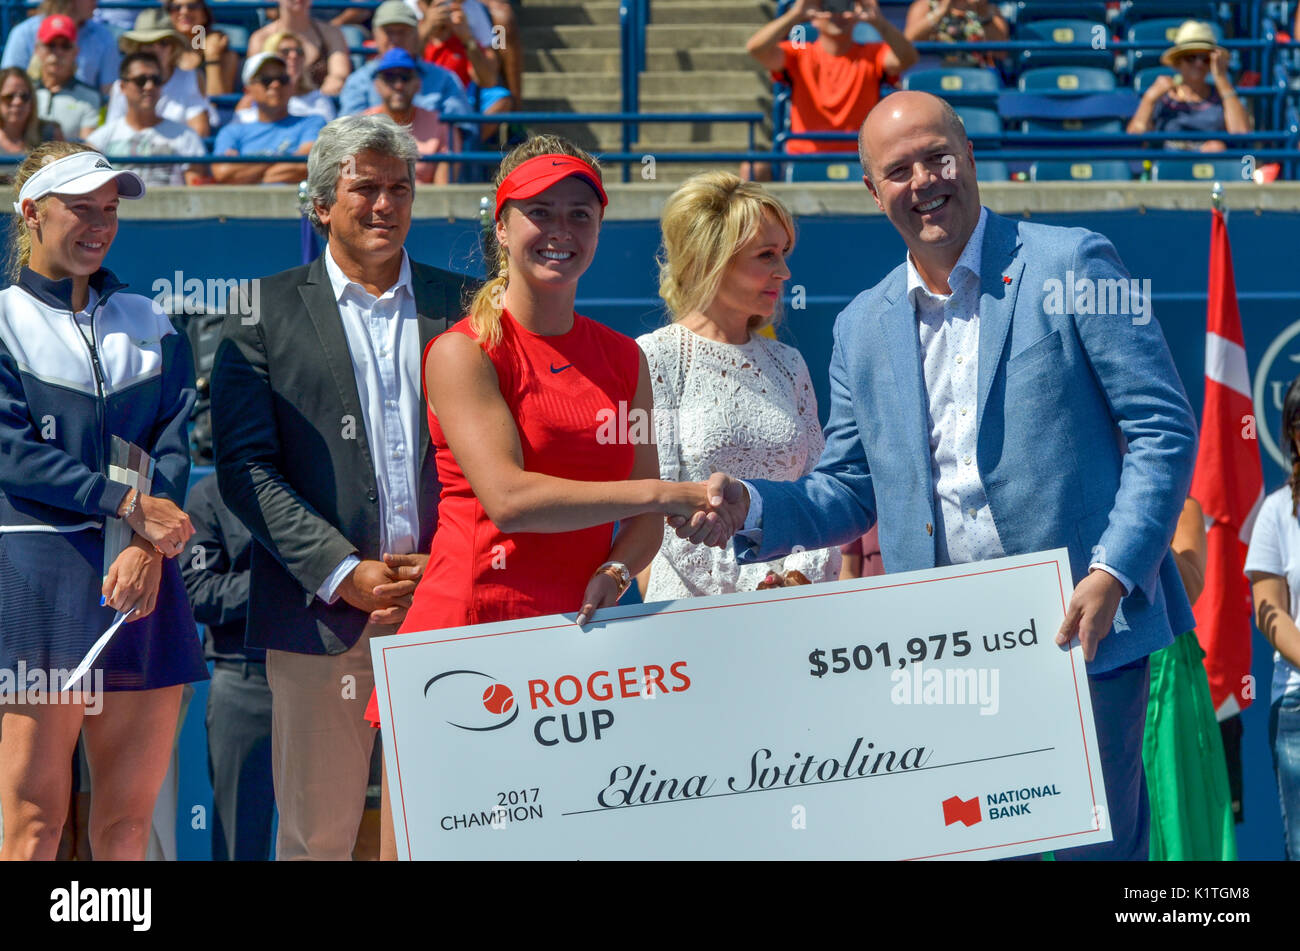 Donna finals Rogers Cup 2017 Foto Stock